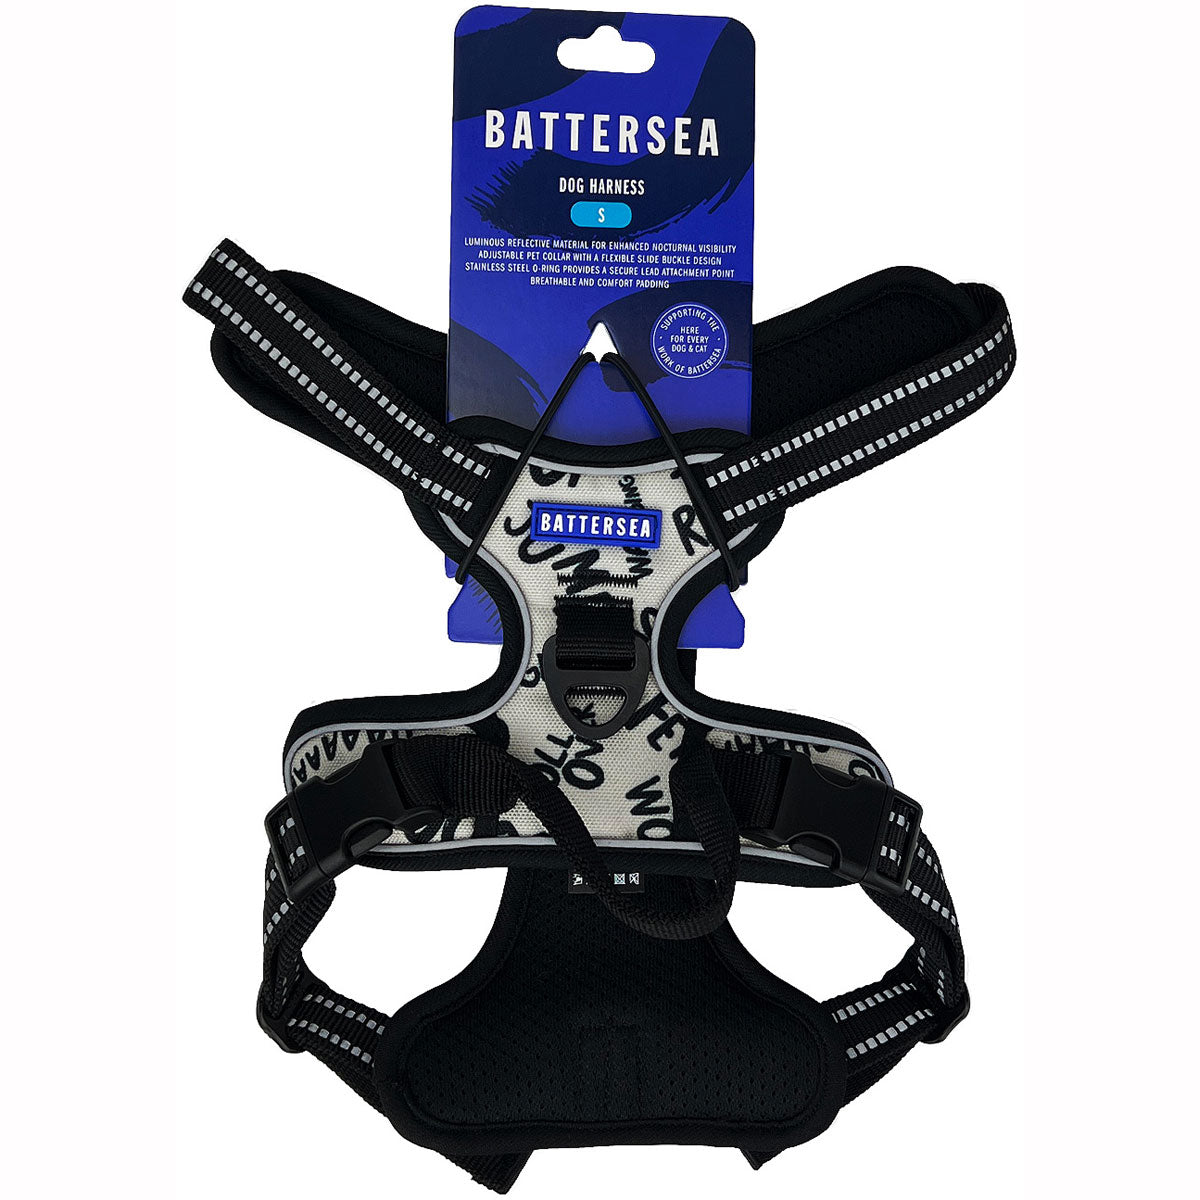 The Battersea Dog Harness: Constructed with luminous reflective material for visibility